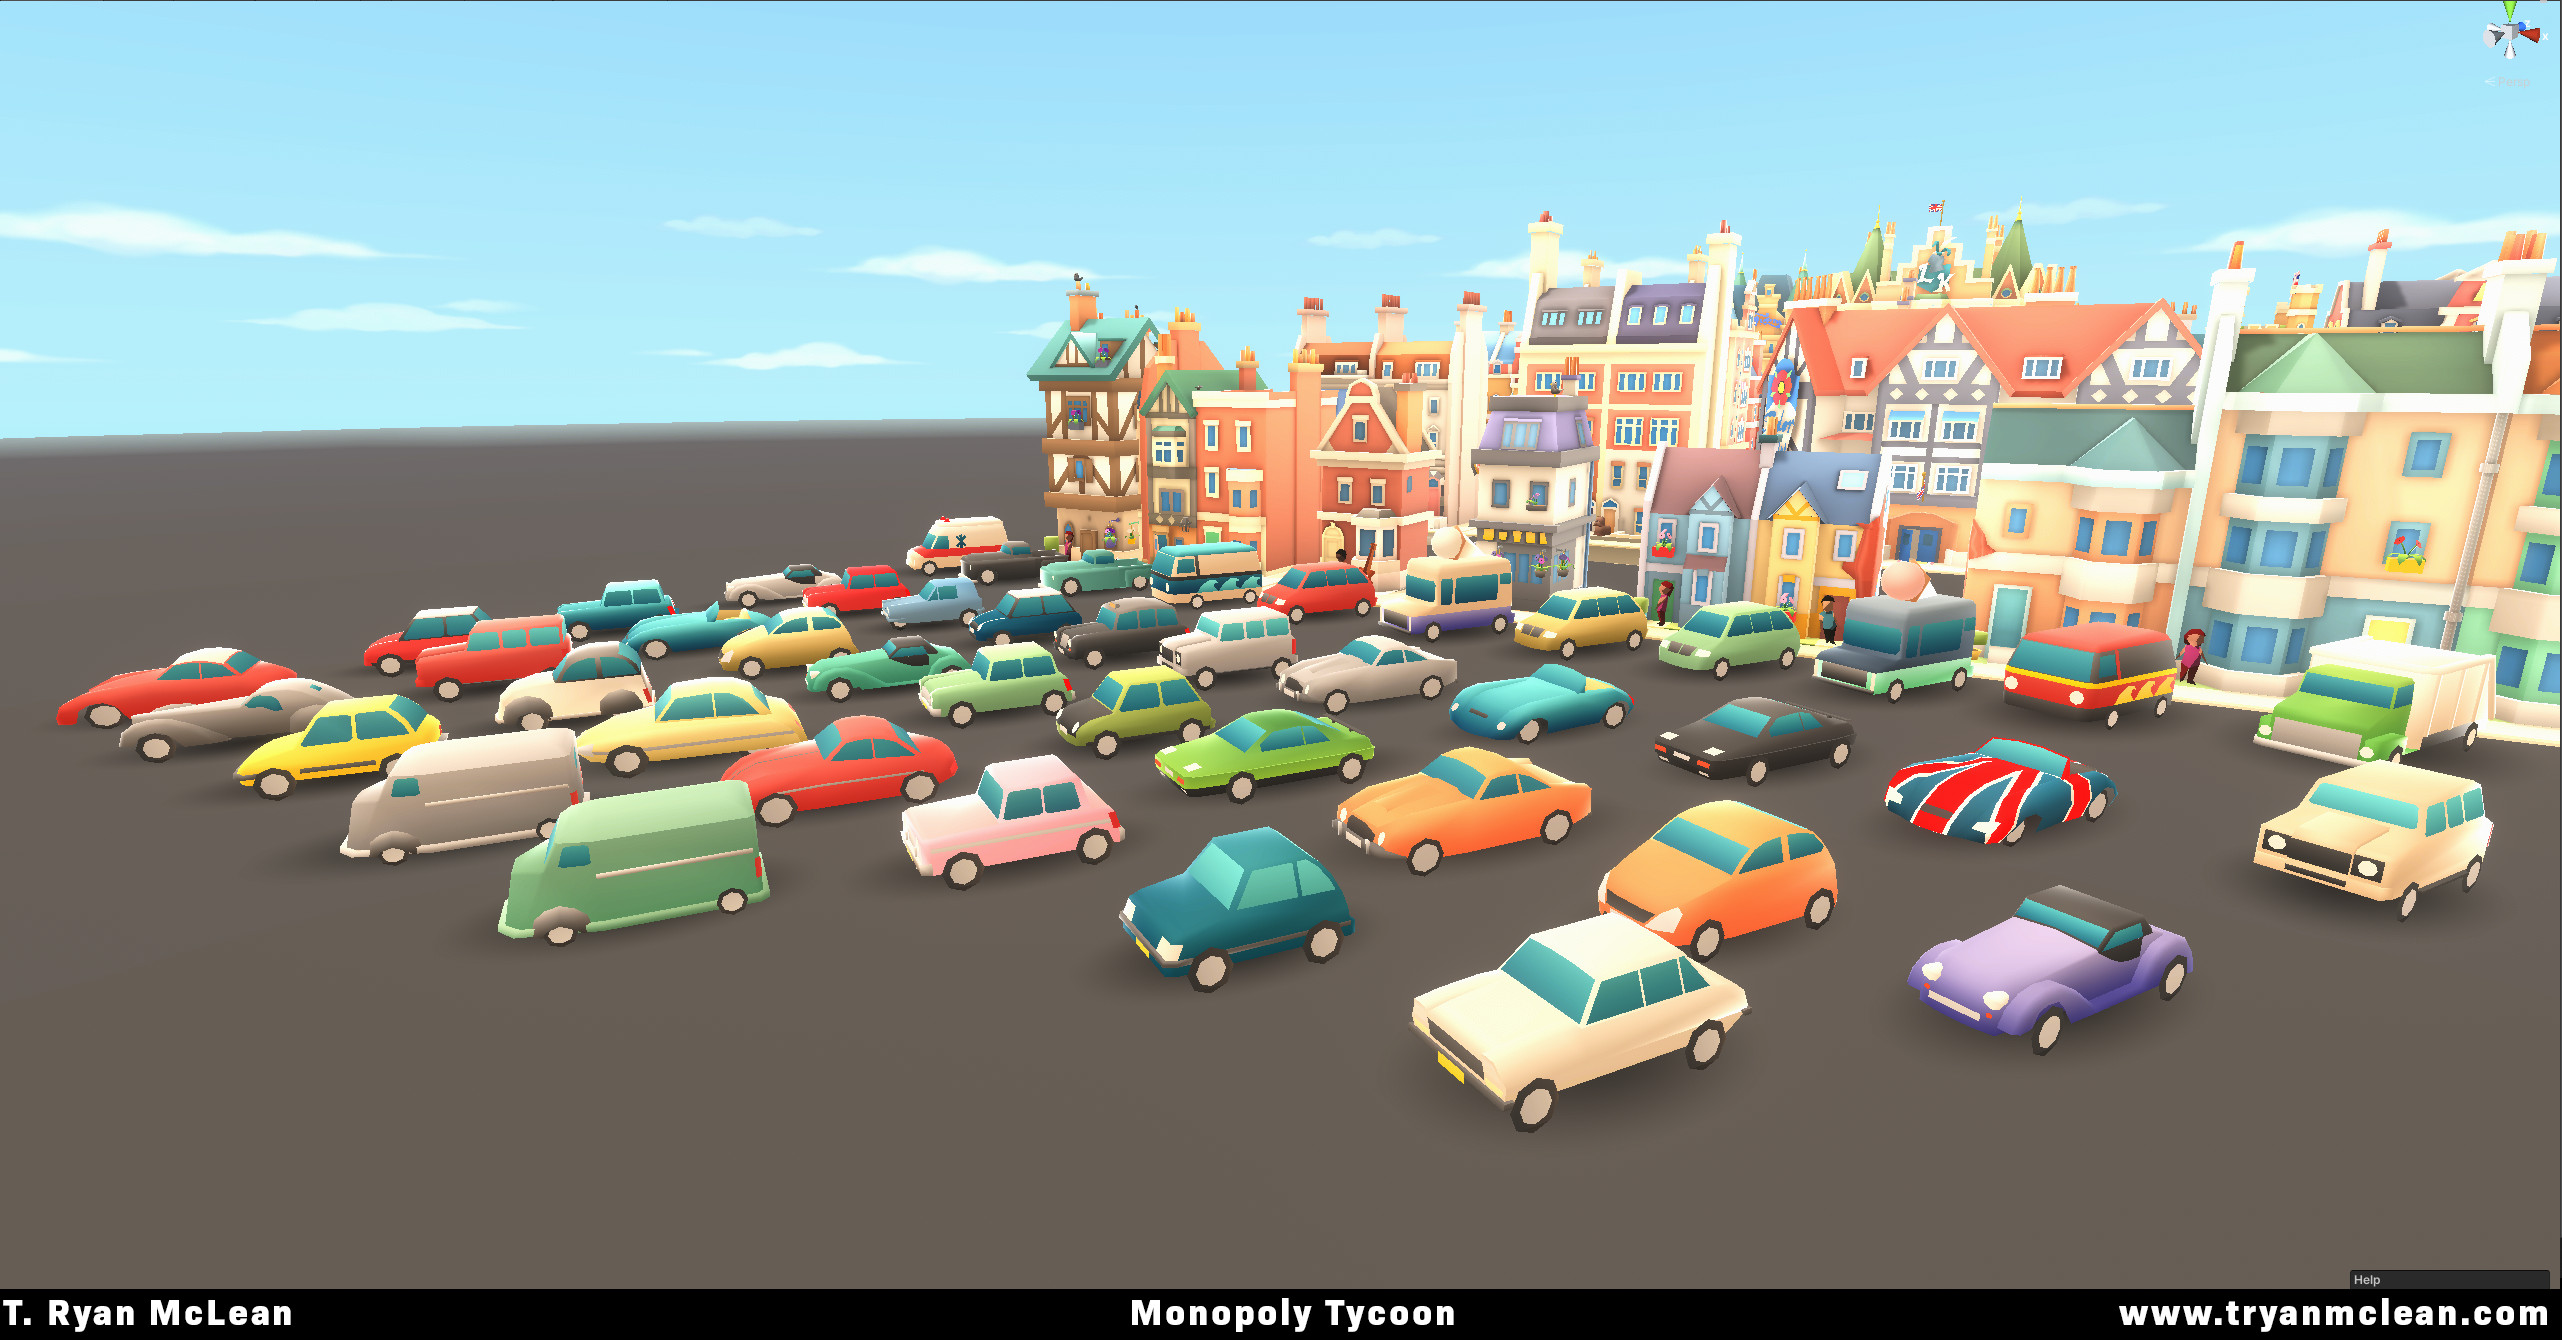 All vehicles modelled and textured by me. Building team's work in background.